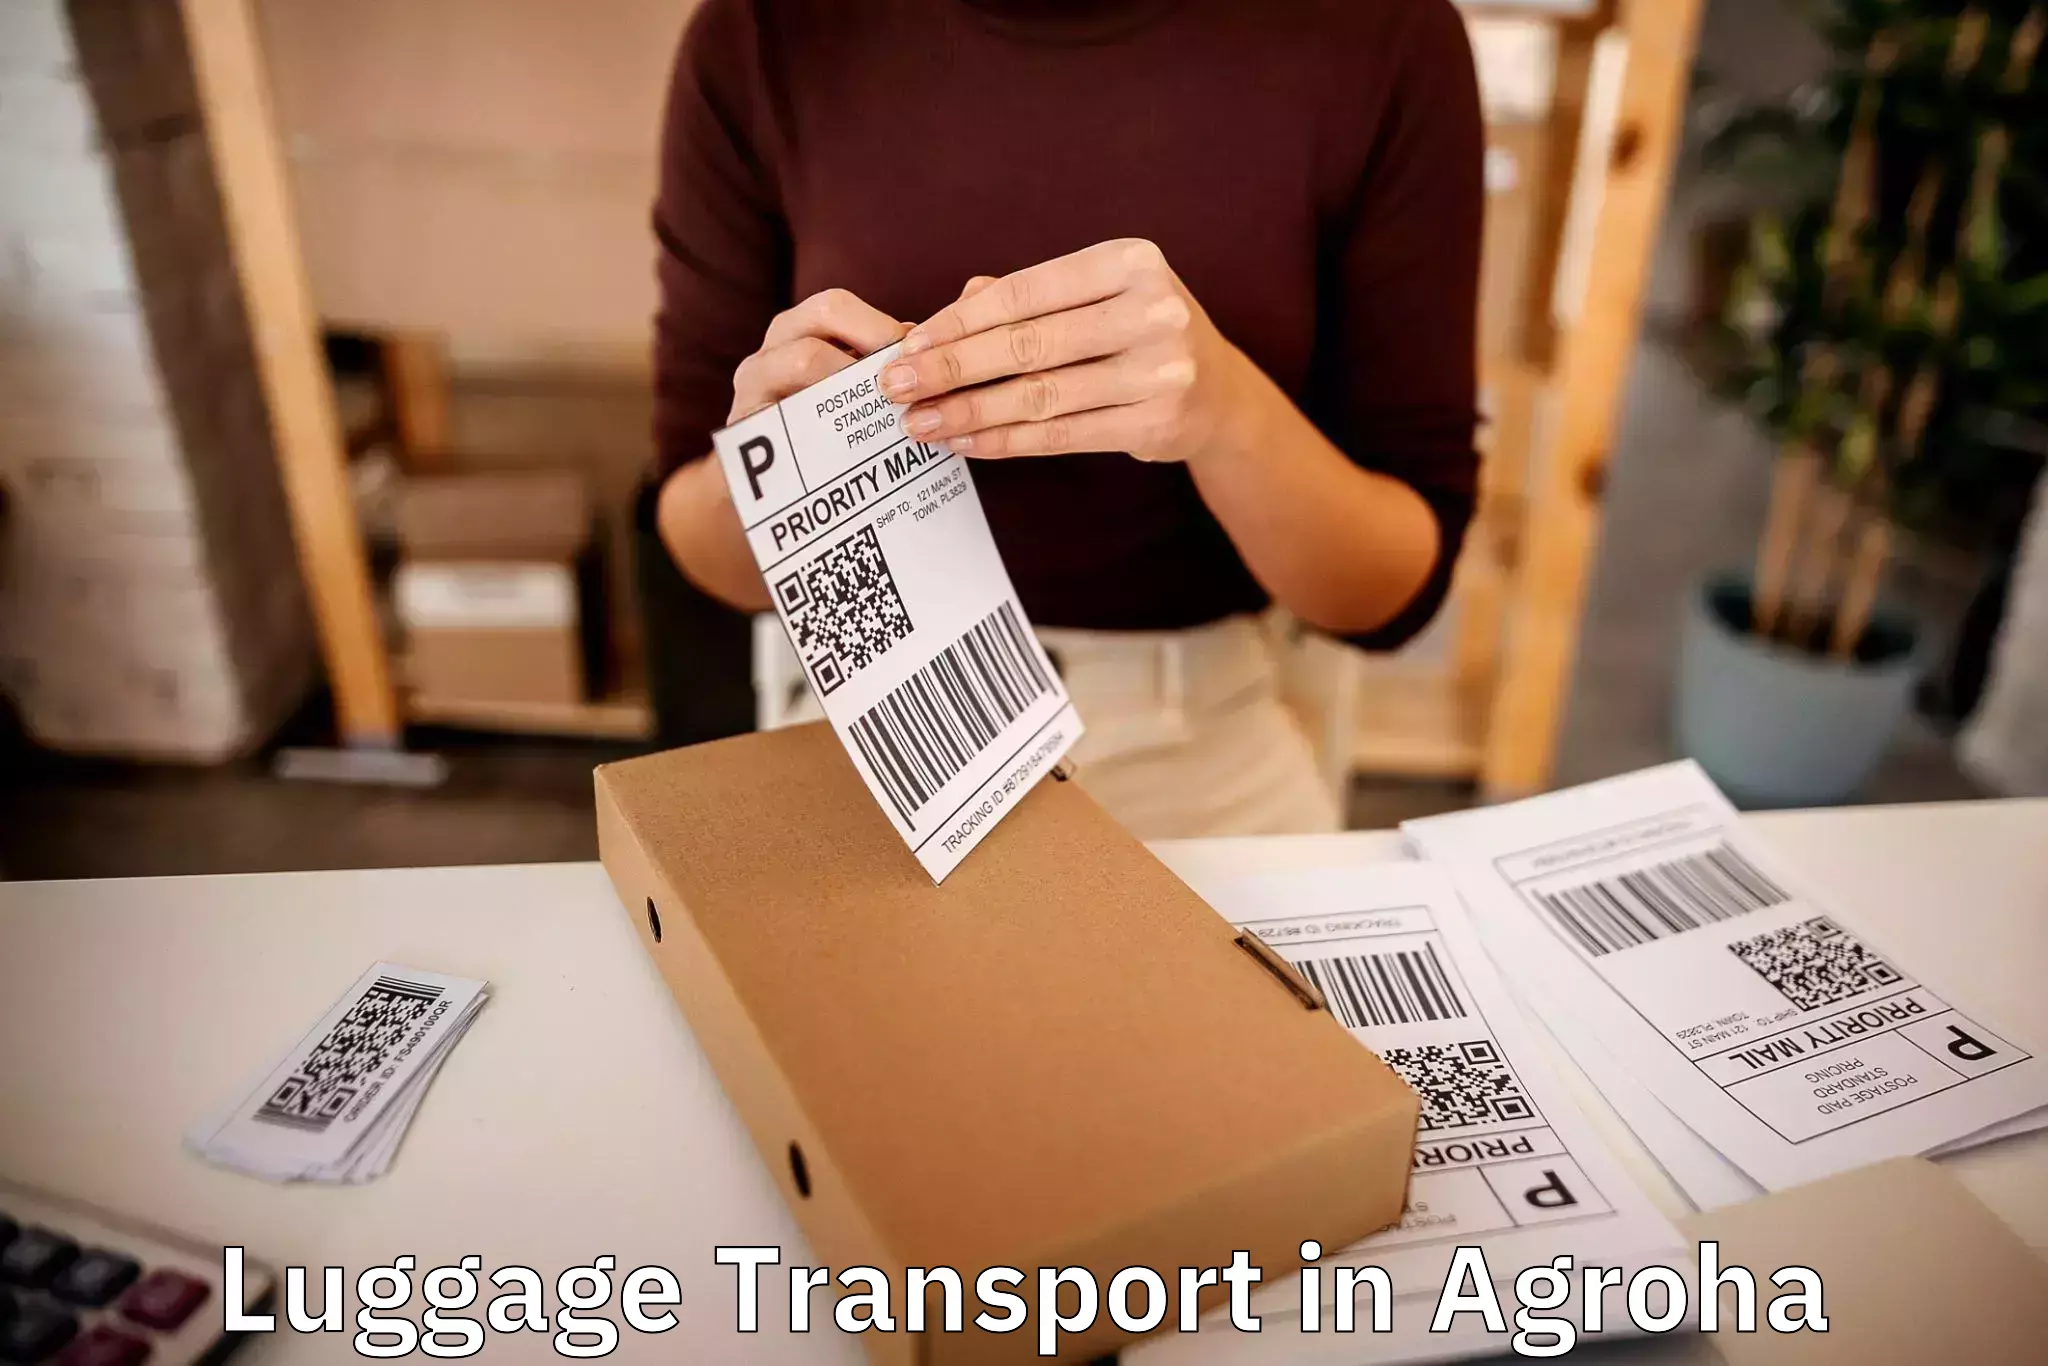 Urgent luggage shipment in Agroha